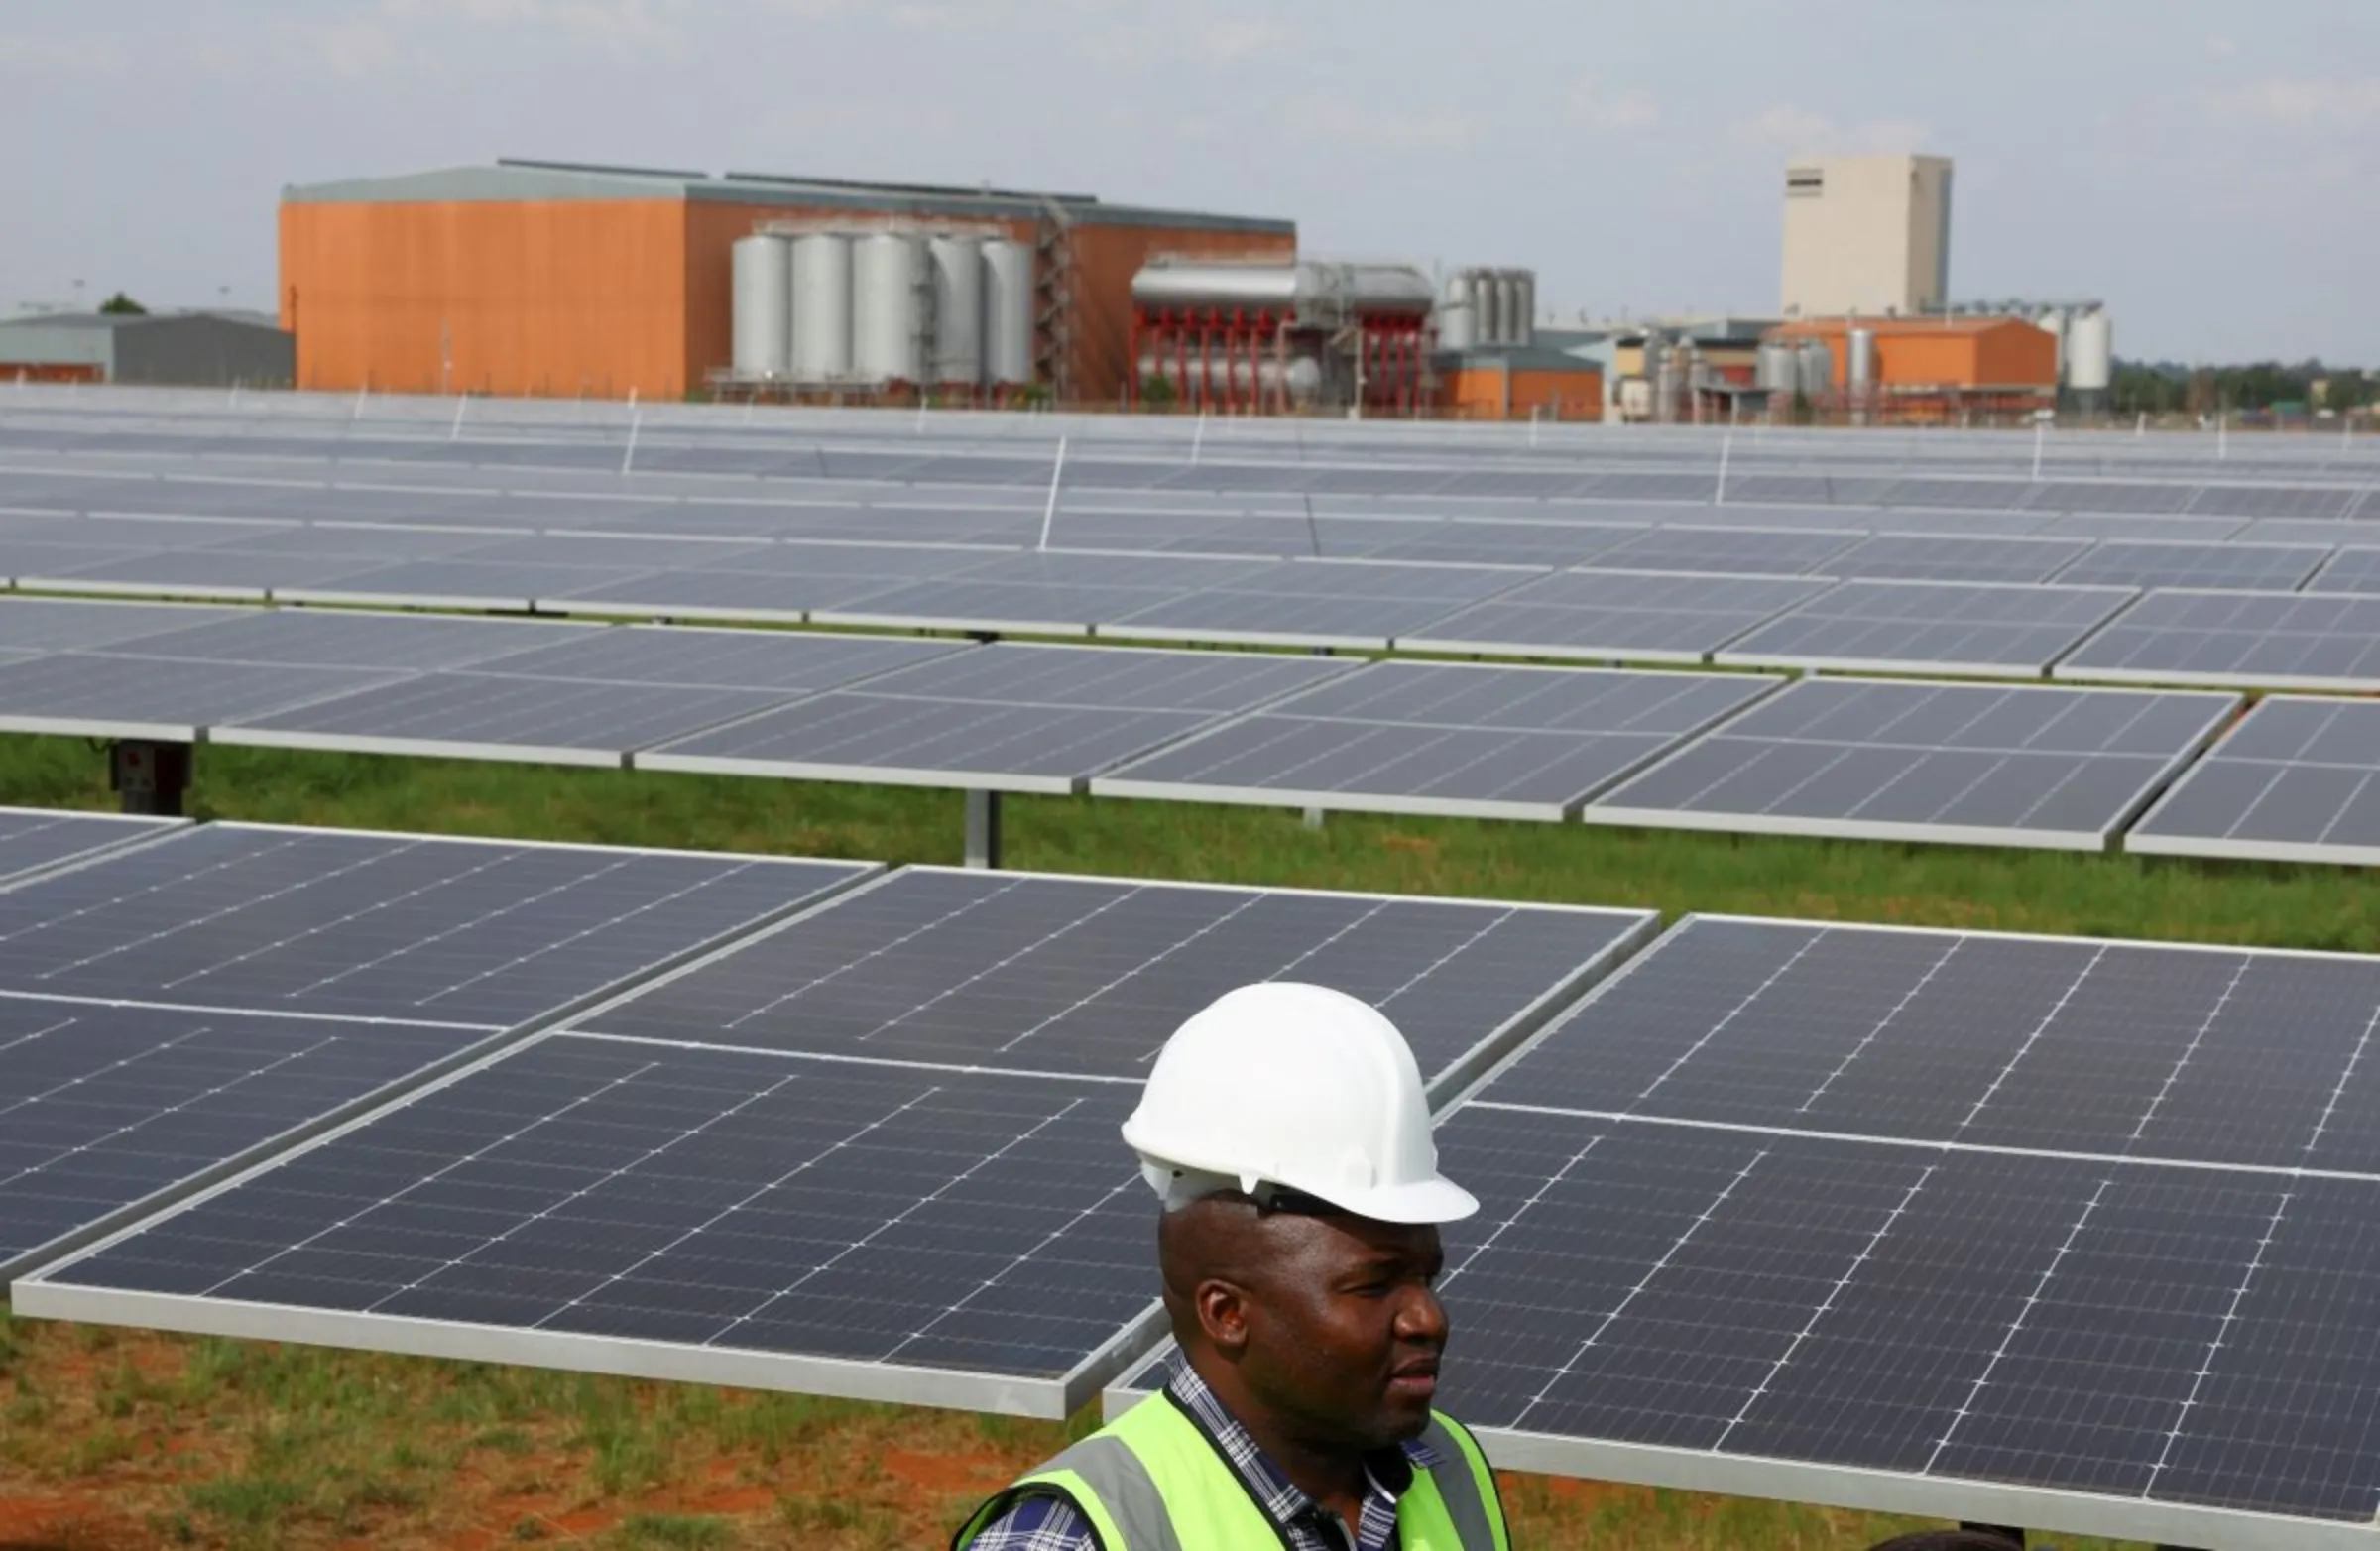 A visitor is seen at the new solar power plant of the South African arm of Heineken, the largest freestanding solar plant powering a brewery in South Africa, at the company's Sedibeng, Midvaal brewery in Johannesburg, South Africa, October 26, 2022. REUTERS/Siphiwe Sibeko